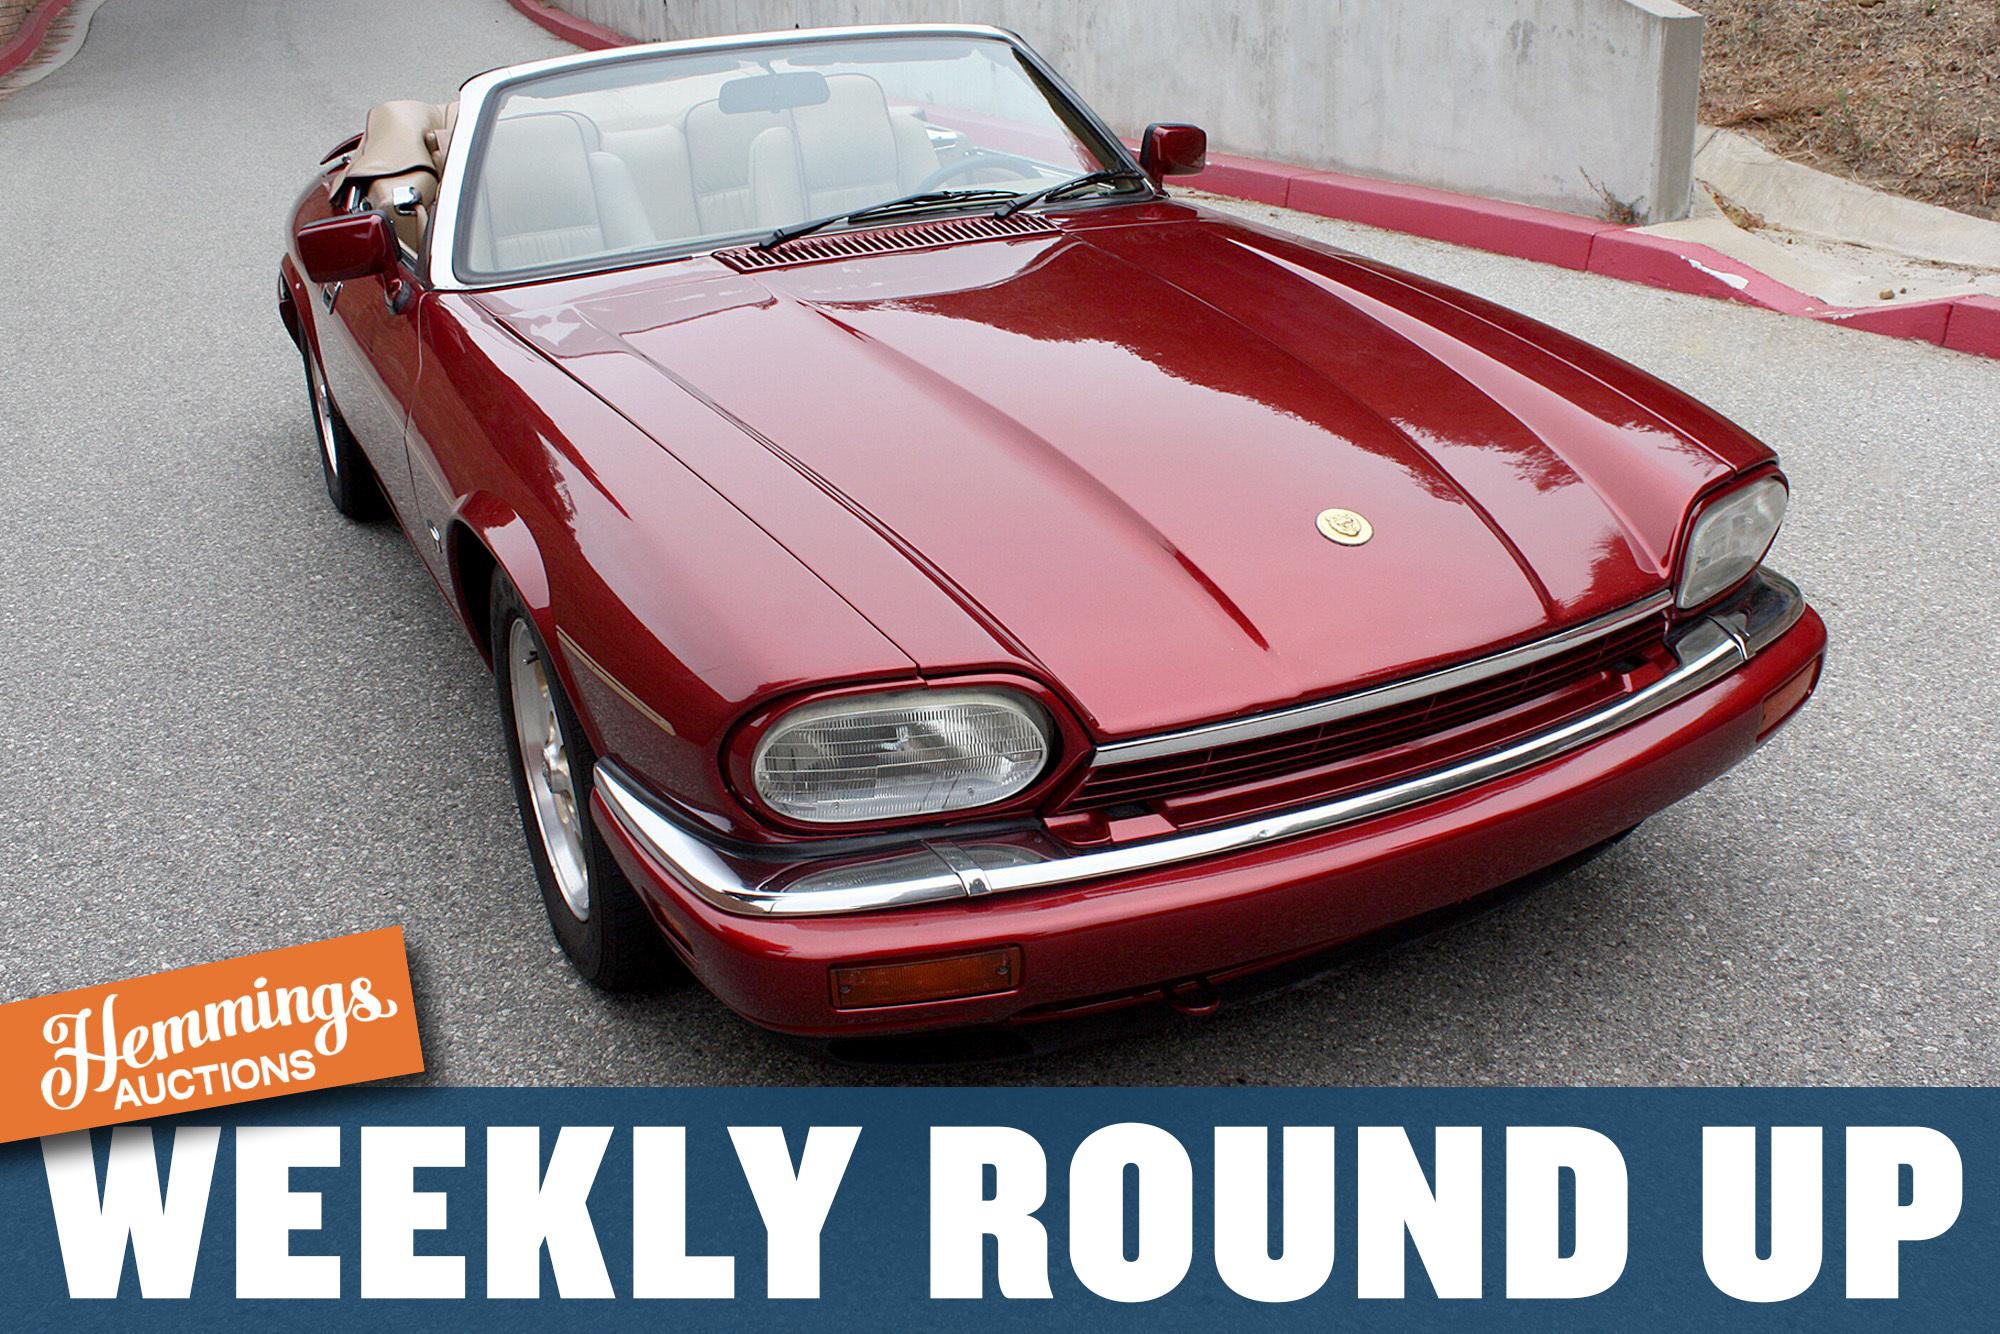 A 12-cylinder Jaguar XJS convertible, Ford Model A Delivery Car, and like-new Challenger R/T Scat Pack: Hemmings Auctions Weekly Round Up for October 23-29, 2022